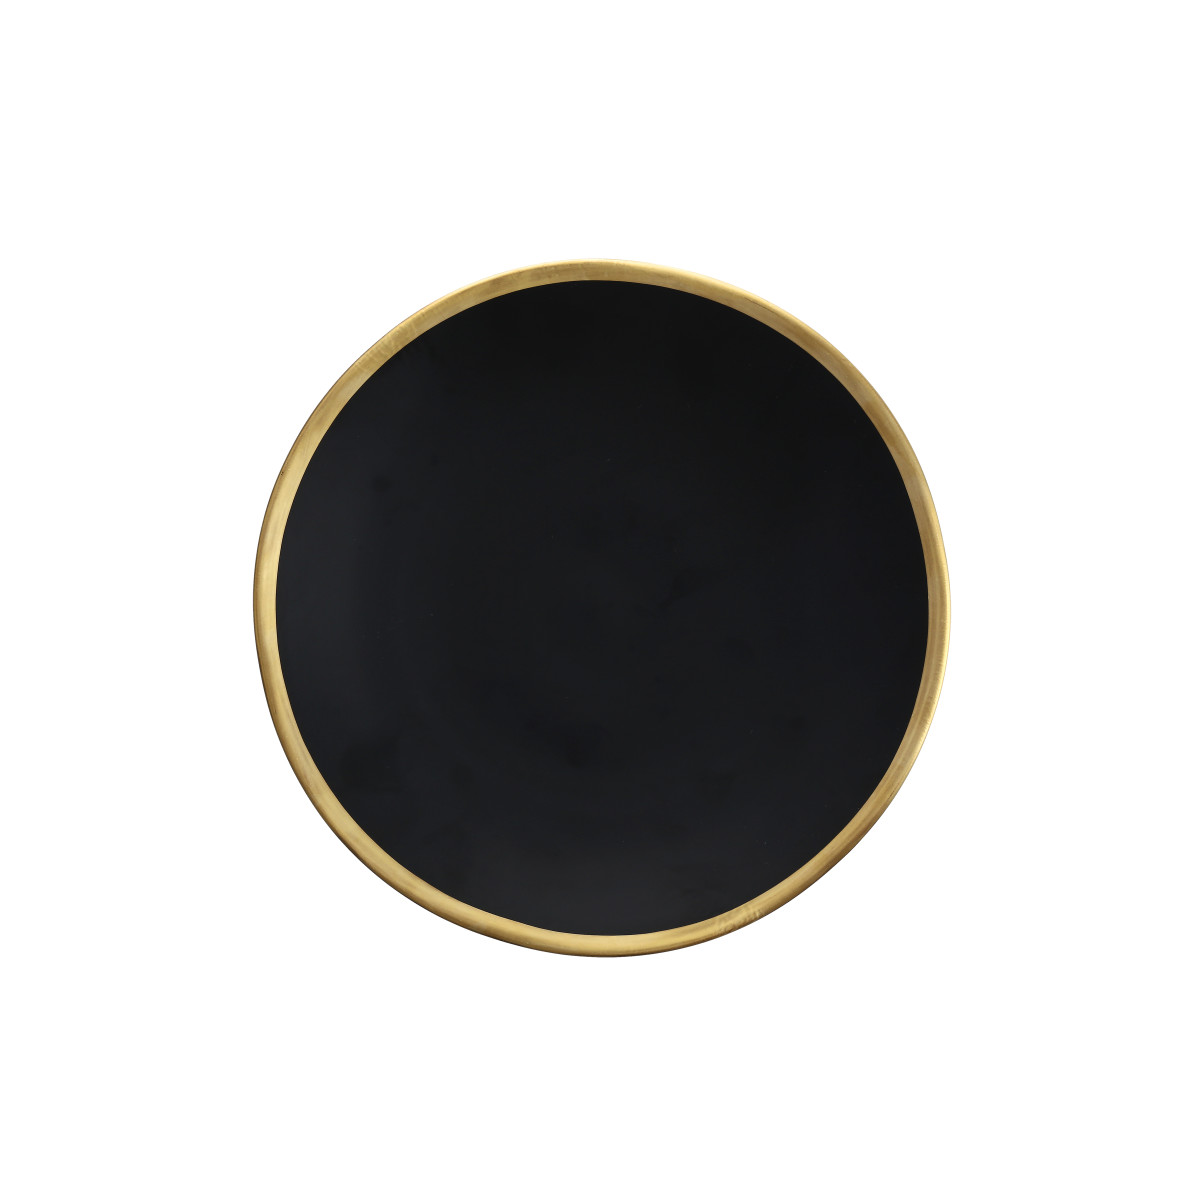 Heirloom Gold Band Charcoal Dinner Plate 10.75"